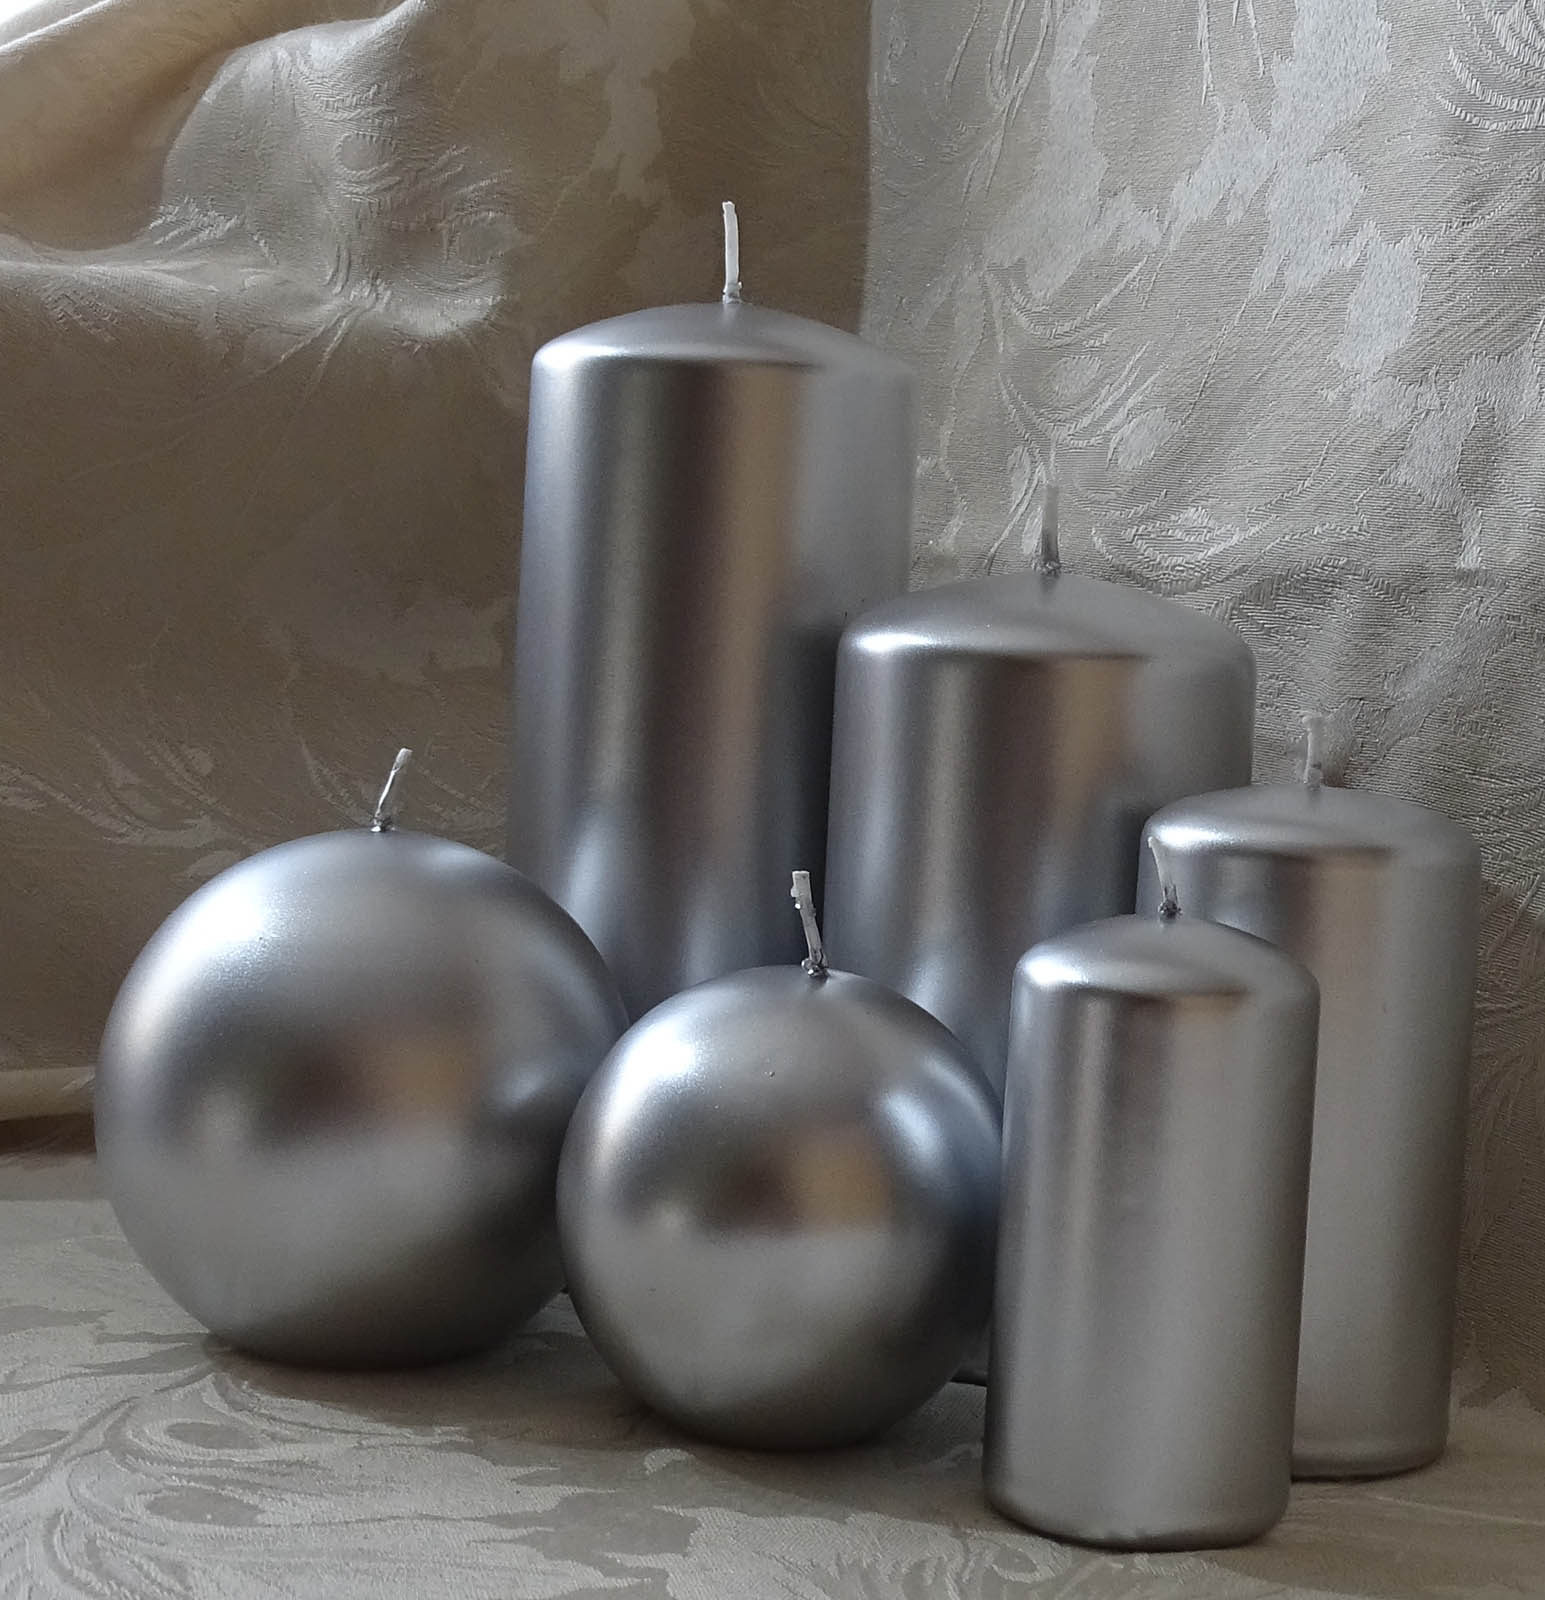 Five pillar and two round candles in silver colour sitting on the cream and silver cable cloth